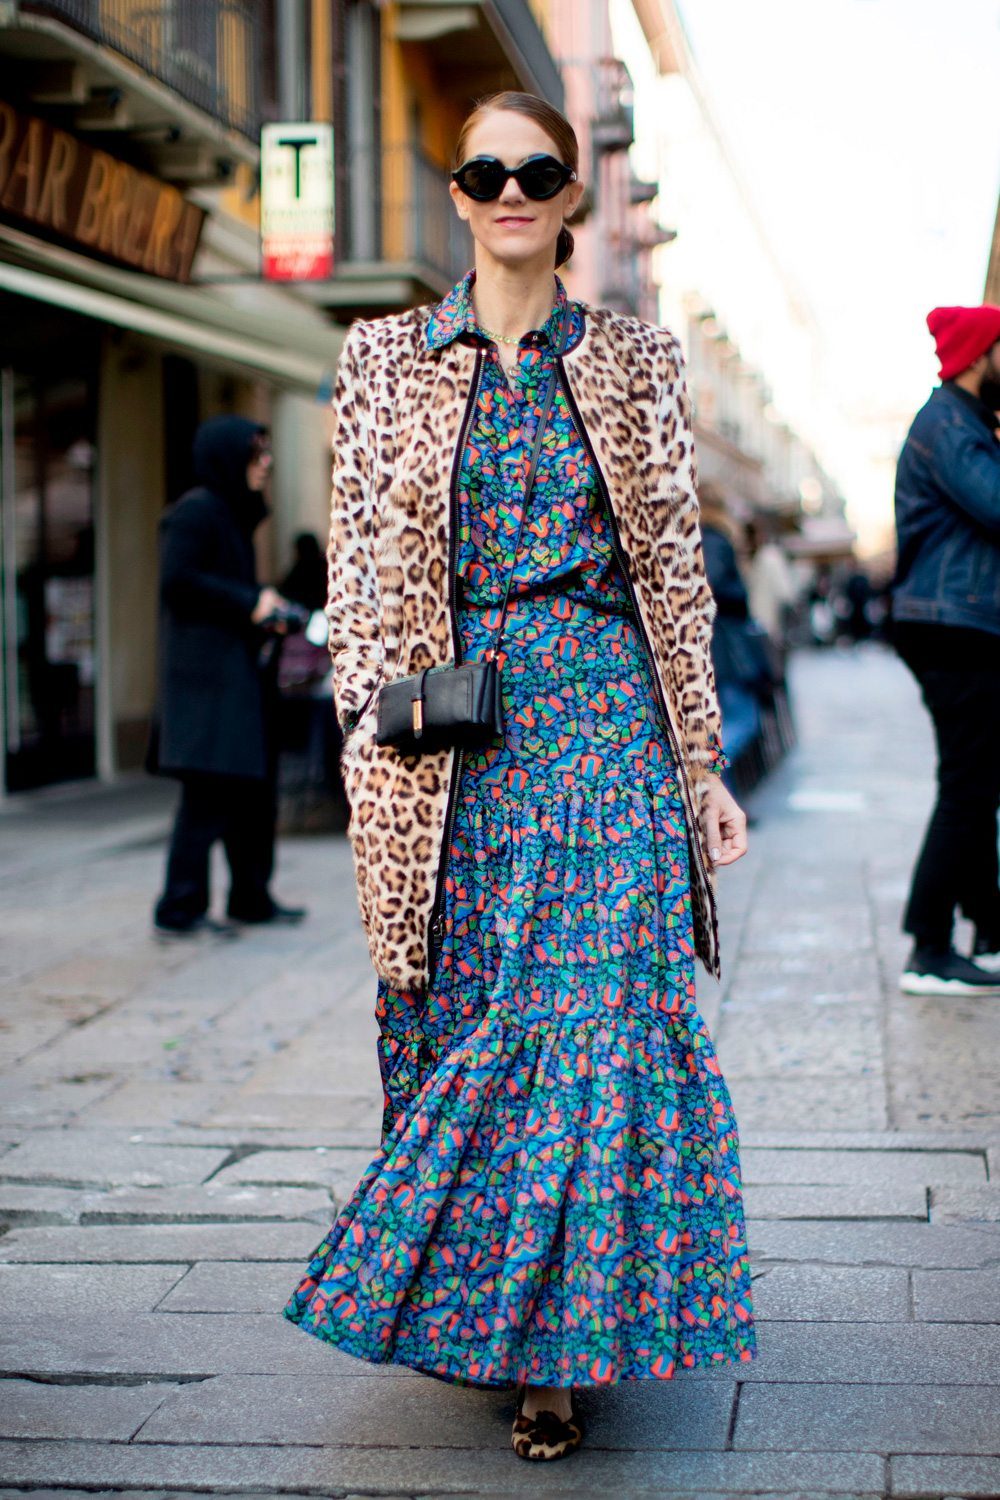 Leopard Print Was Spotted on the Street at All Four Fashion Capitals ...